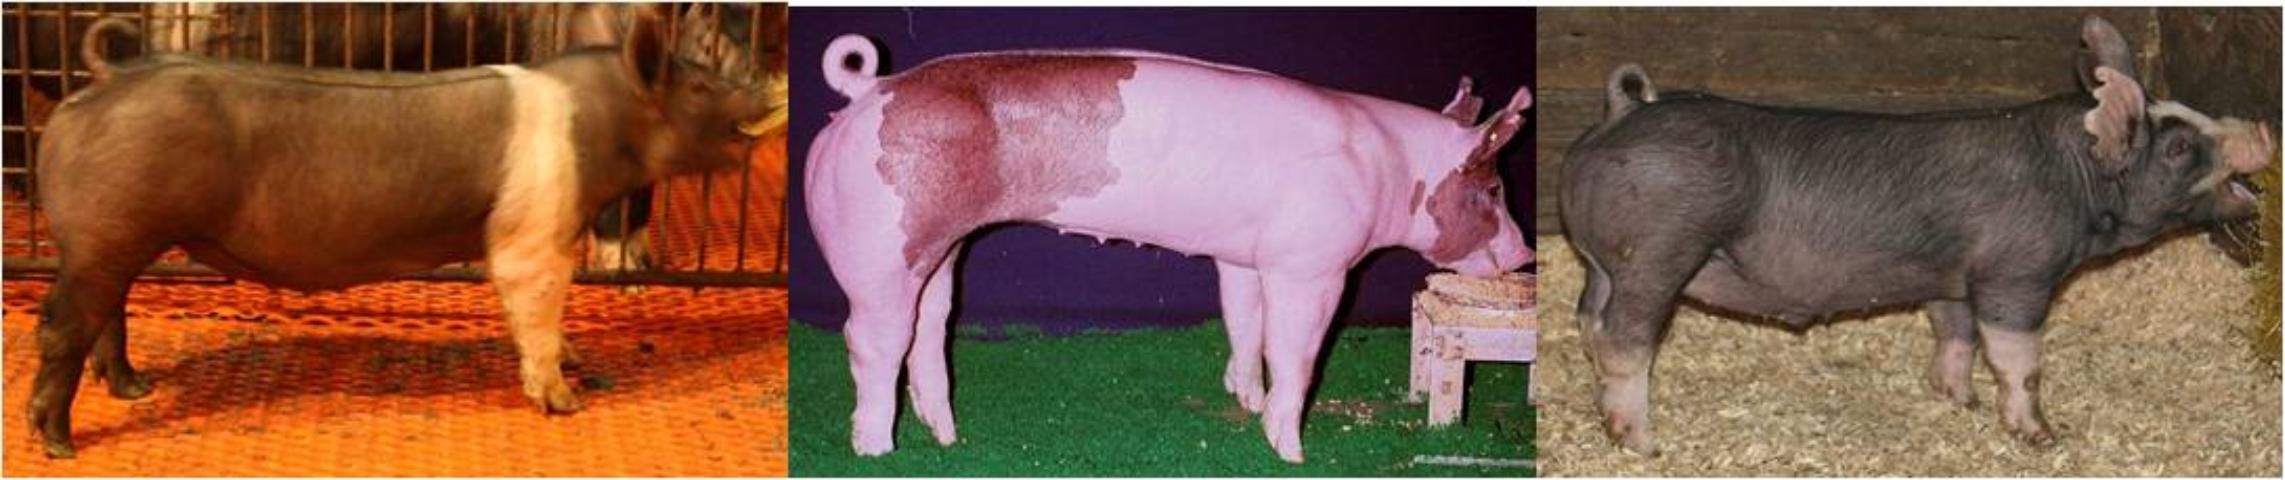 Figure 5. From left to right: a gilt with secondary growth indicators that suggest she will be a good project; a likely slow-growing, low-volumed gilt with a large frame; a likely slow-growing barrow that is short-boned and short-bodied.